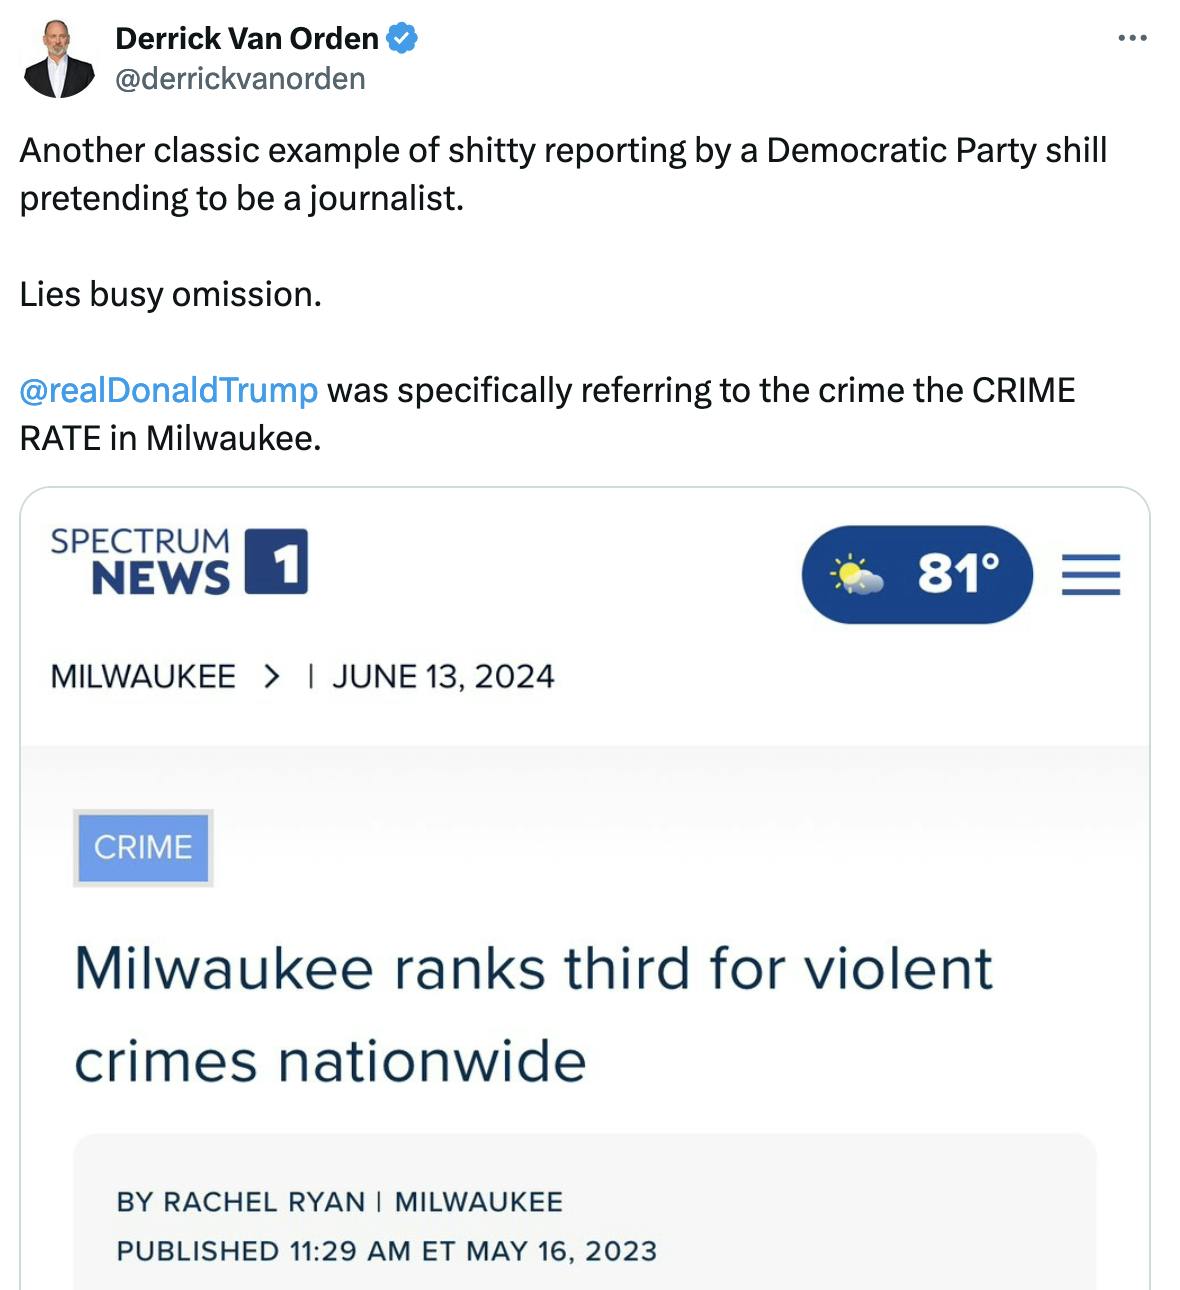 Tweet screenshot Derrick Van Orden: Another classic example of shitty reporting by a Democratic Party shill pretending to be a journalist. Lies busy omission. @realDonaldTrump was specifically referring to the crime the CRIME RATE in Milwaukee. Tweet accompanies an article that reads "Milwaukee ranks third for violent crimes nationwide"